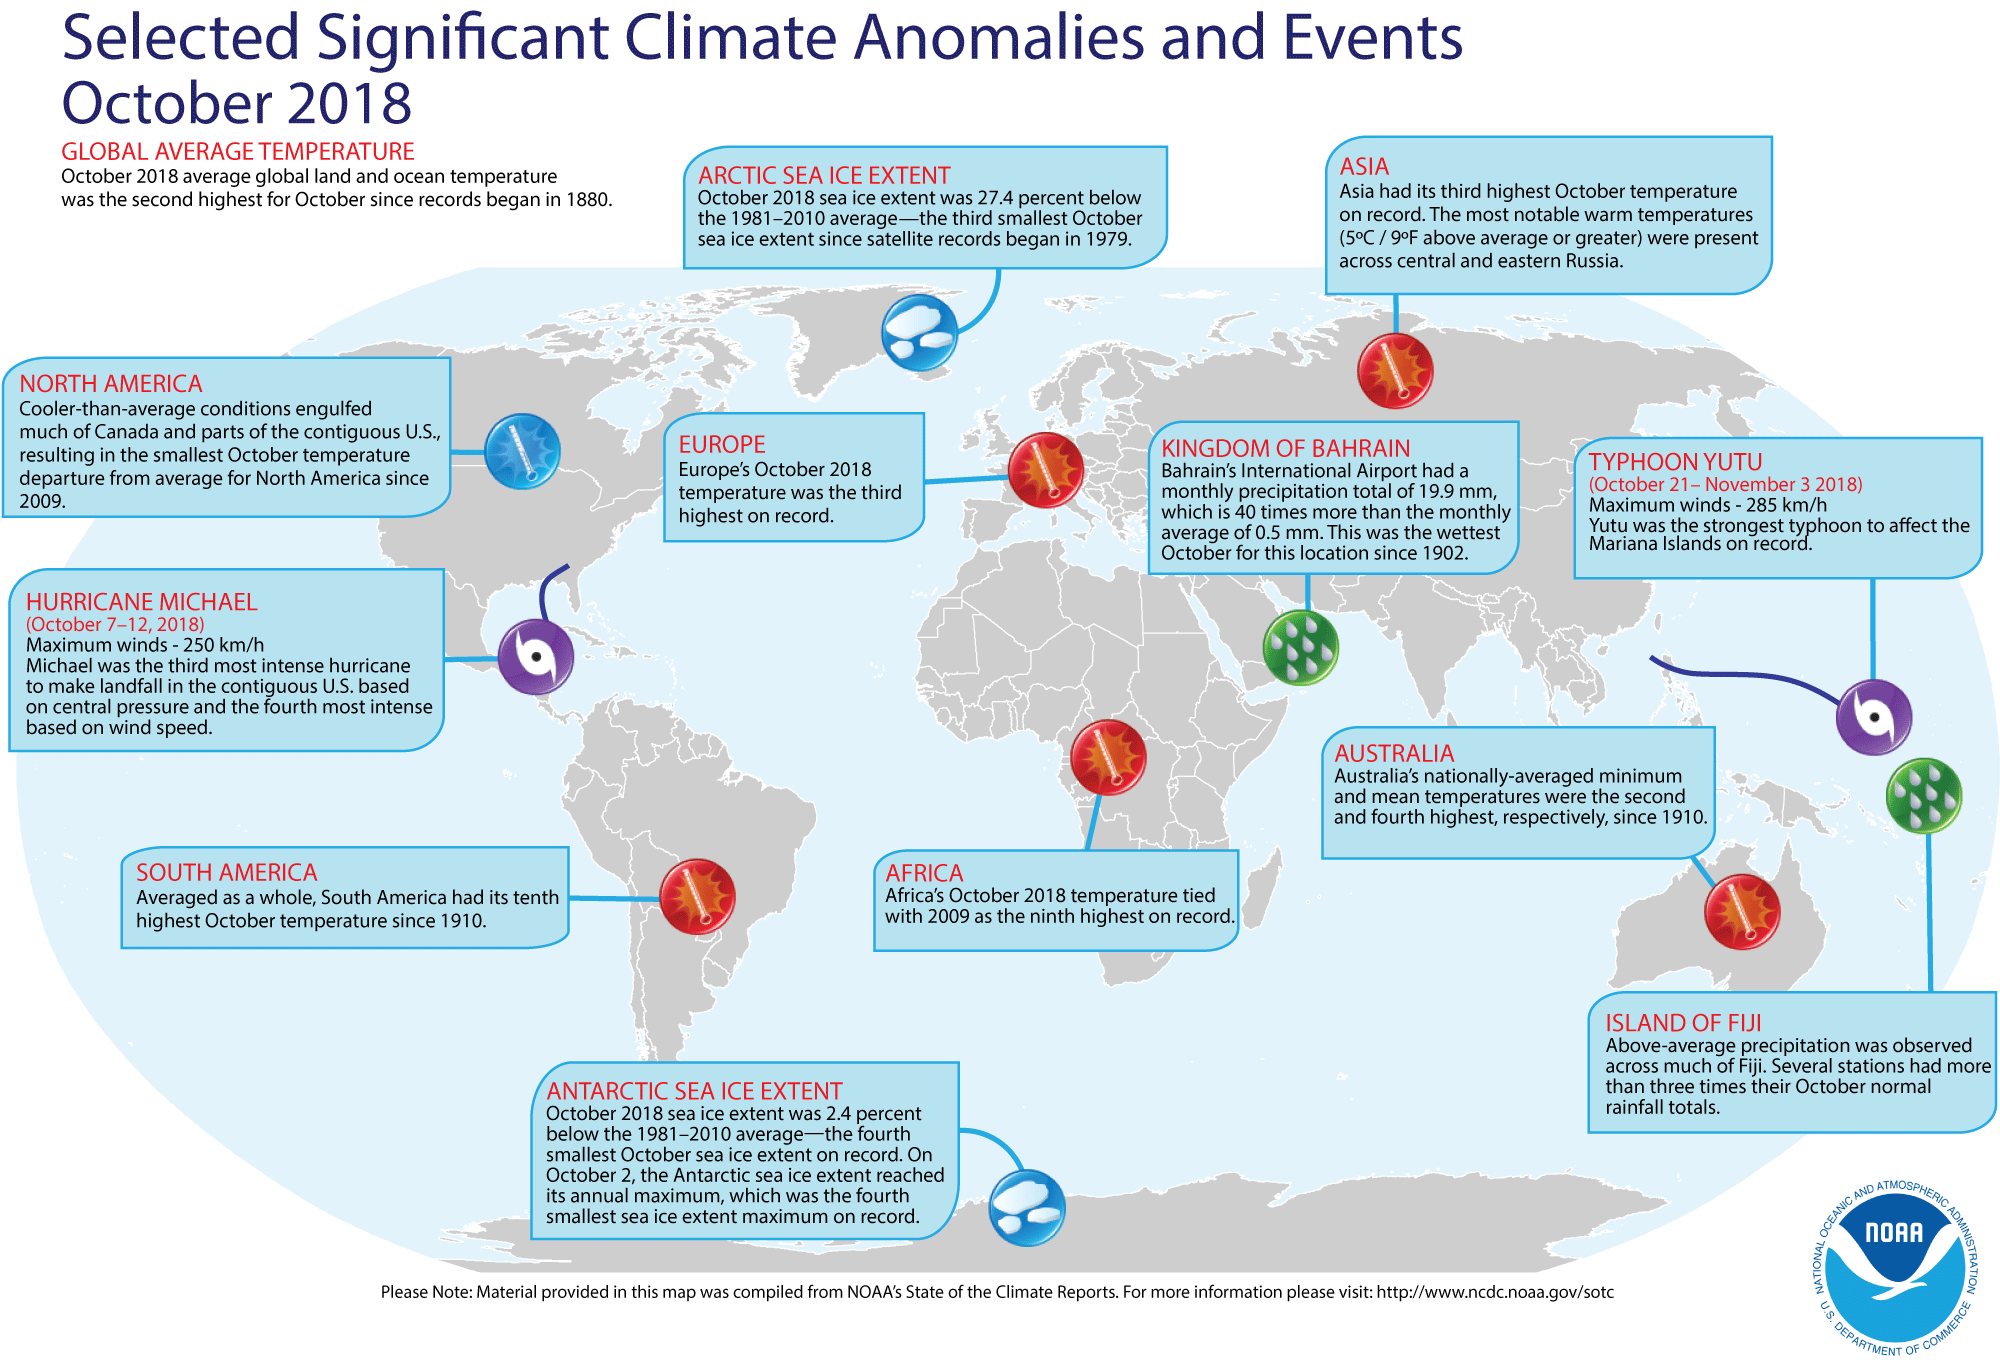 An annotated map of the world showing notable climate events that occurred in October 2018. For details, see the bulleted list below in our story and on the Web at http://www.ncdc.noaa.gov/sotc/global/2018/10.